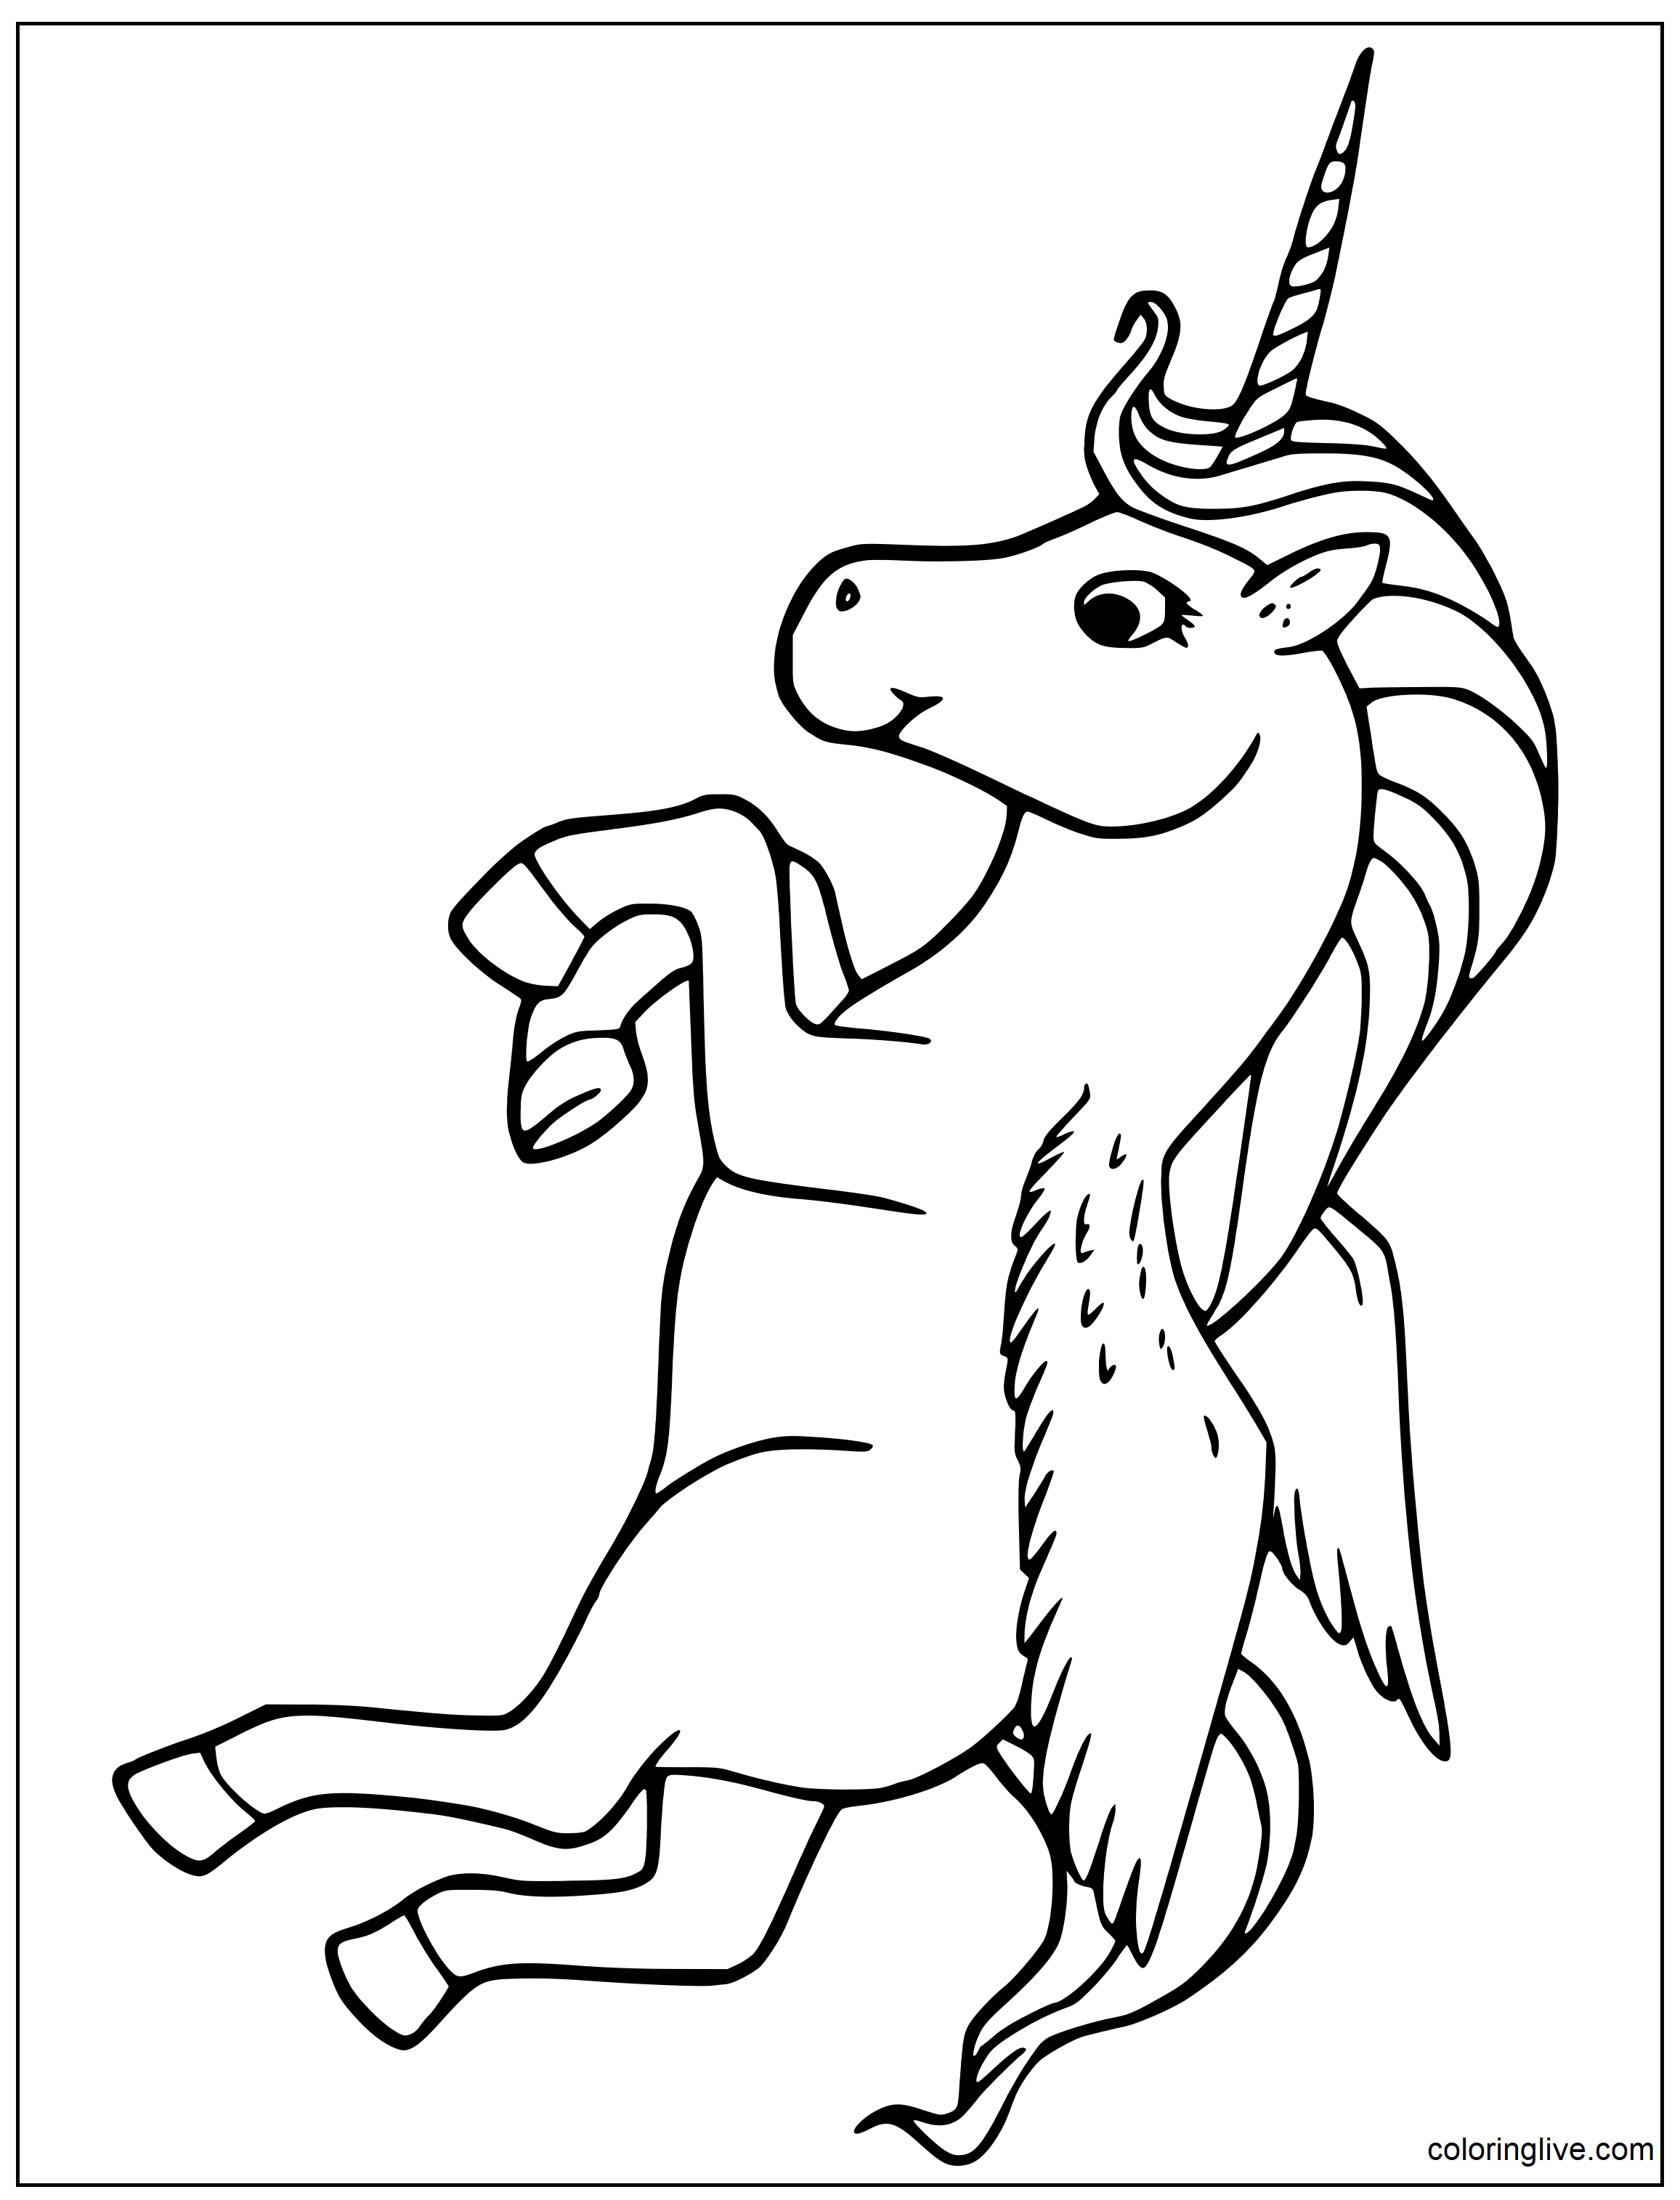 Printable Alicorn is flying Coloring Page for kids.